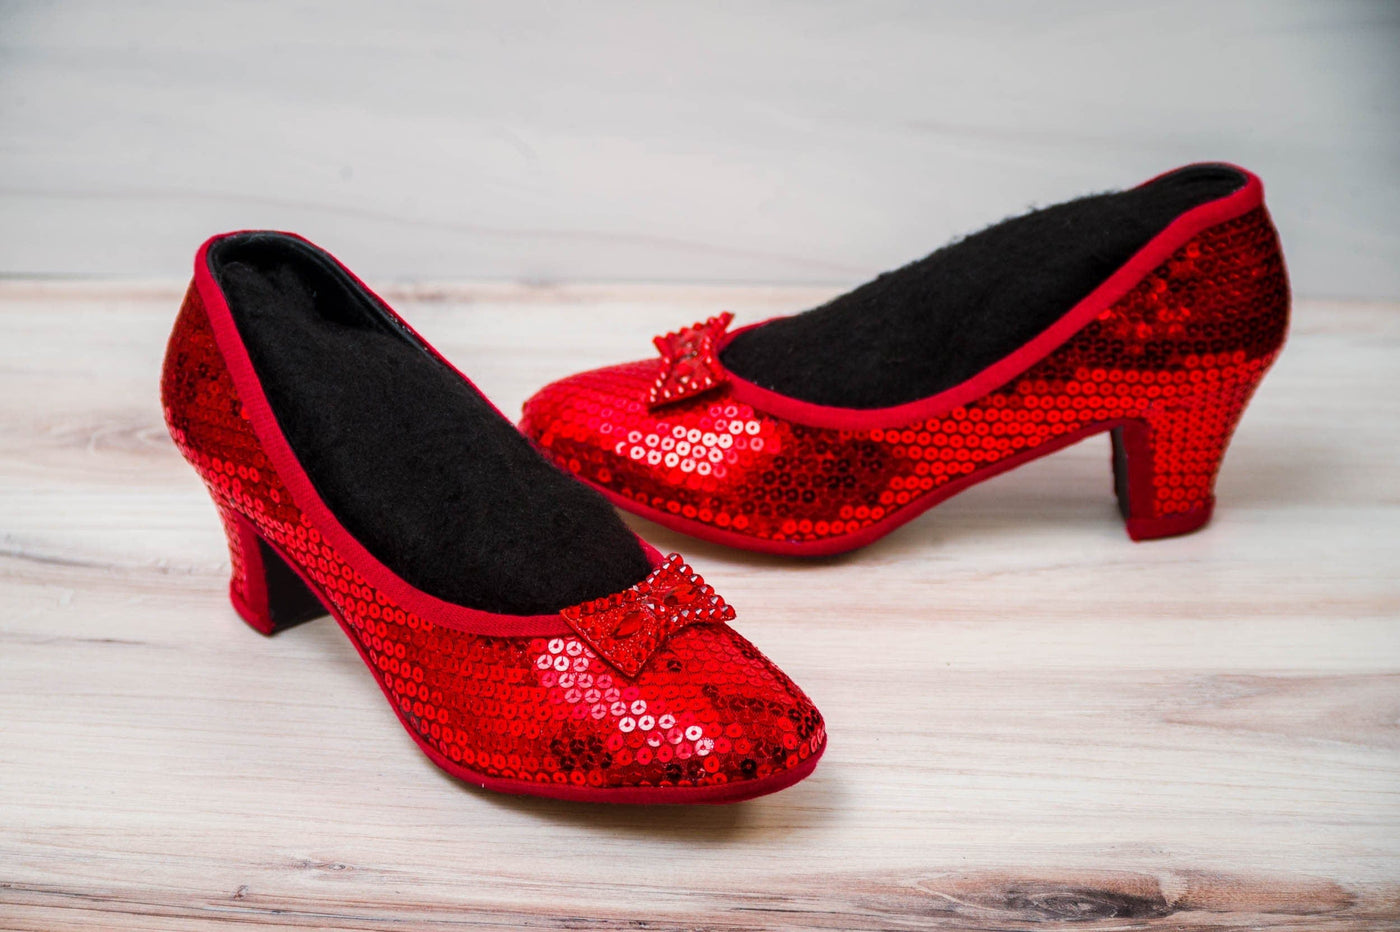 Wedding Shoes Red Sequin French High Heels. Brides, Bridesmaids, Halloween, Cosplay